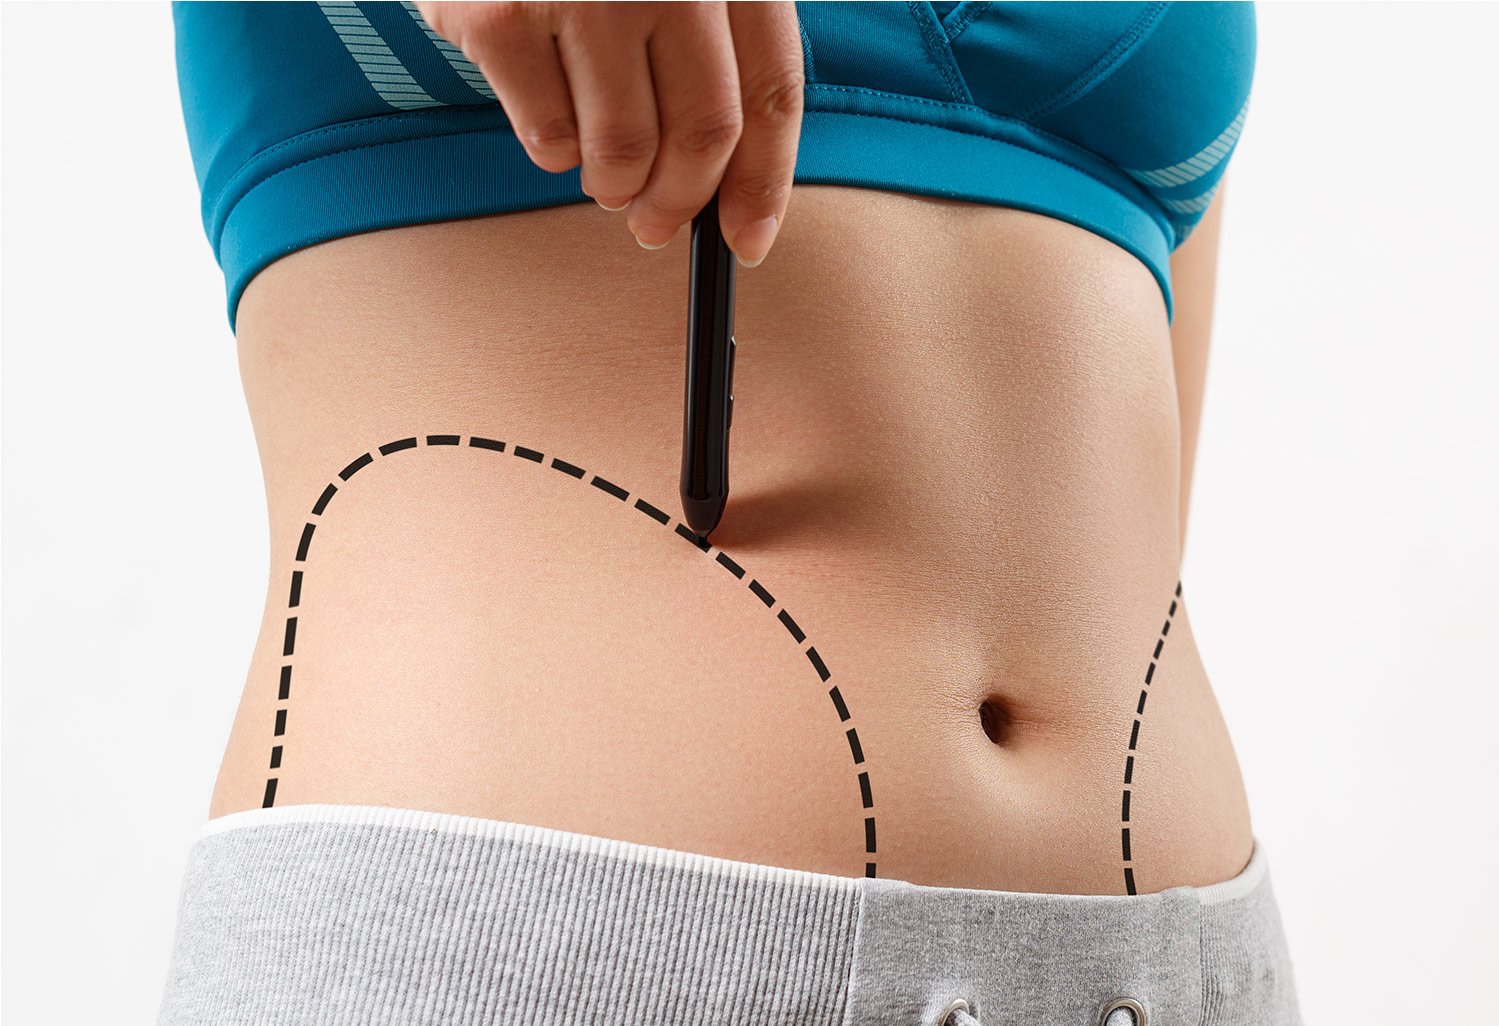 Liposuction doctor in Indore